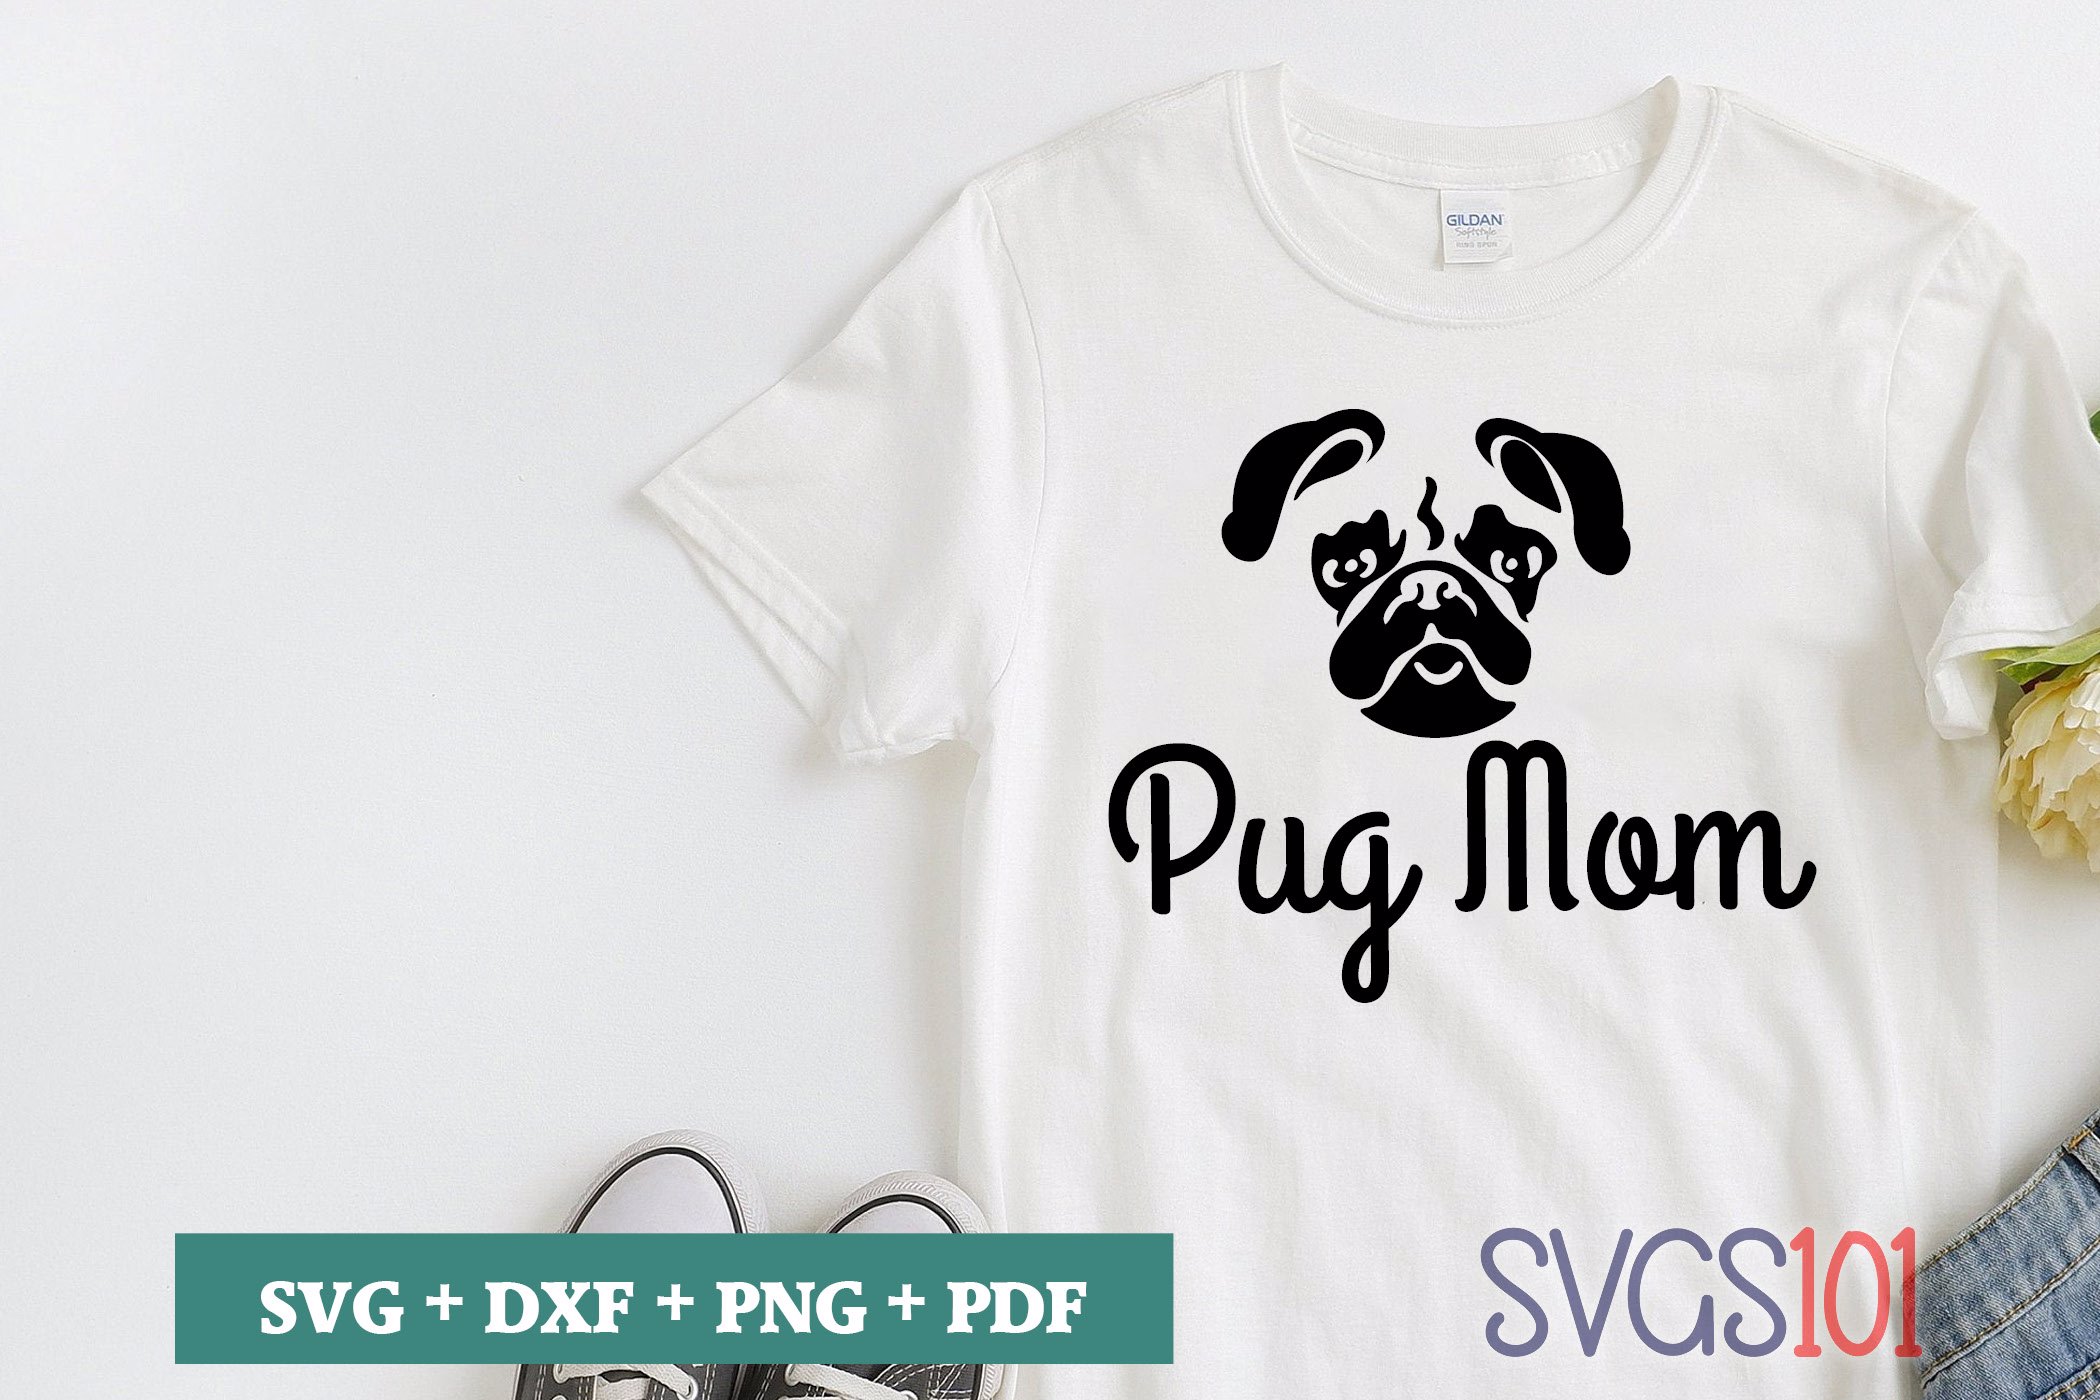 Download Pug Mom SVG Cuttable file - DXF, EPS, PNG, PDF | SVG Cutting File